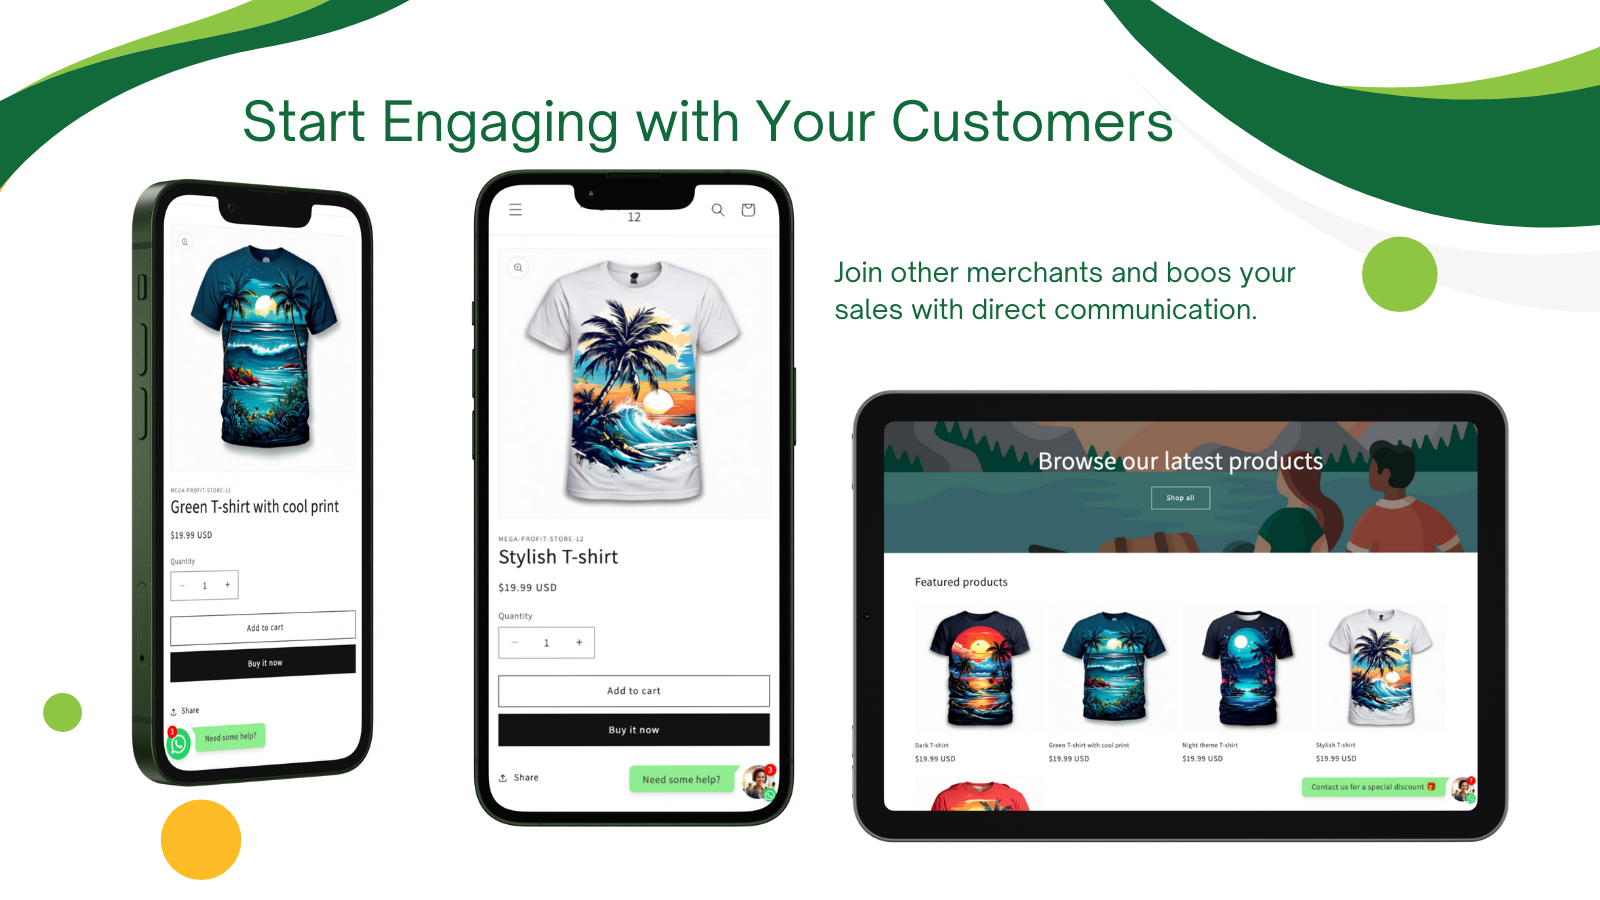 Mega WhatsApp Button - Begynd at Engagere med Dine Kunder